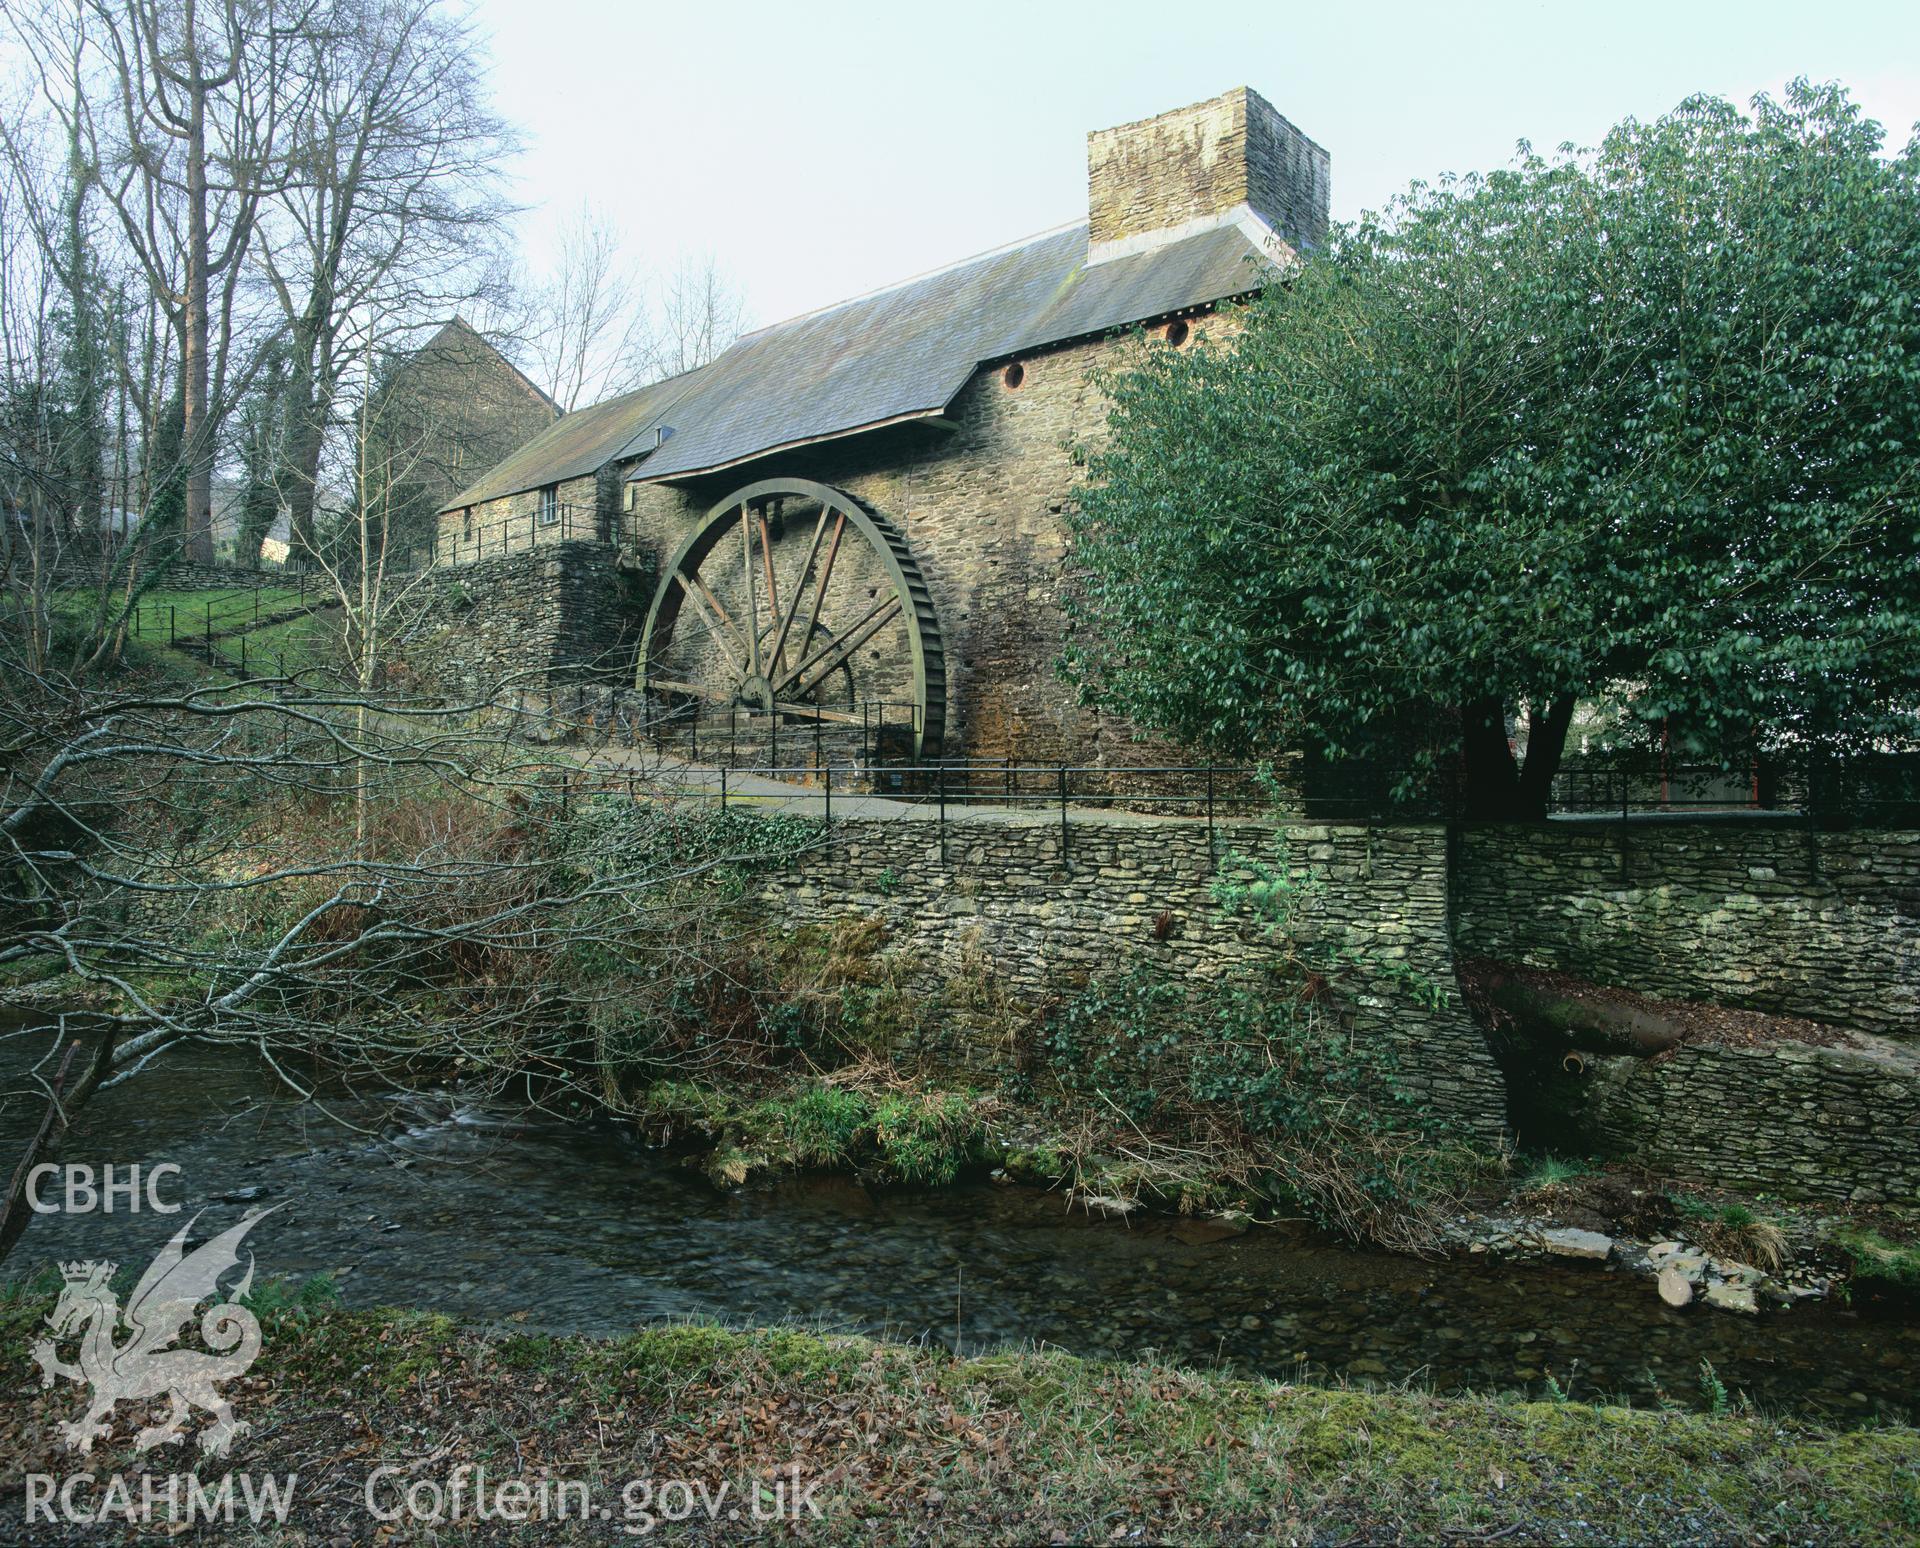 Colour transparency showing a view of Dyfi Furnace, Ceredigion, produced by Iain Wright, June 2004